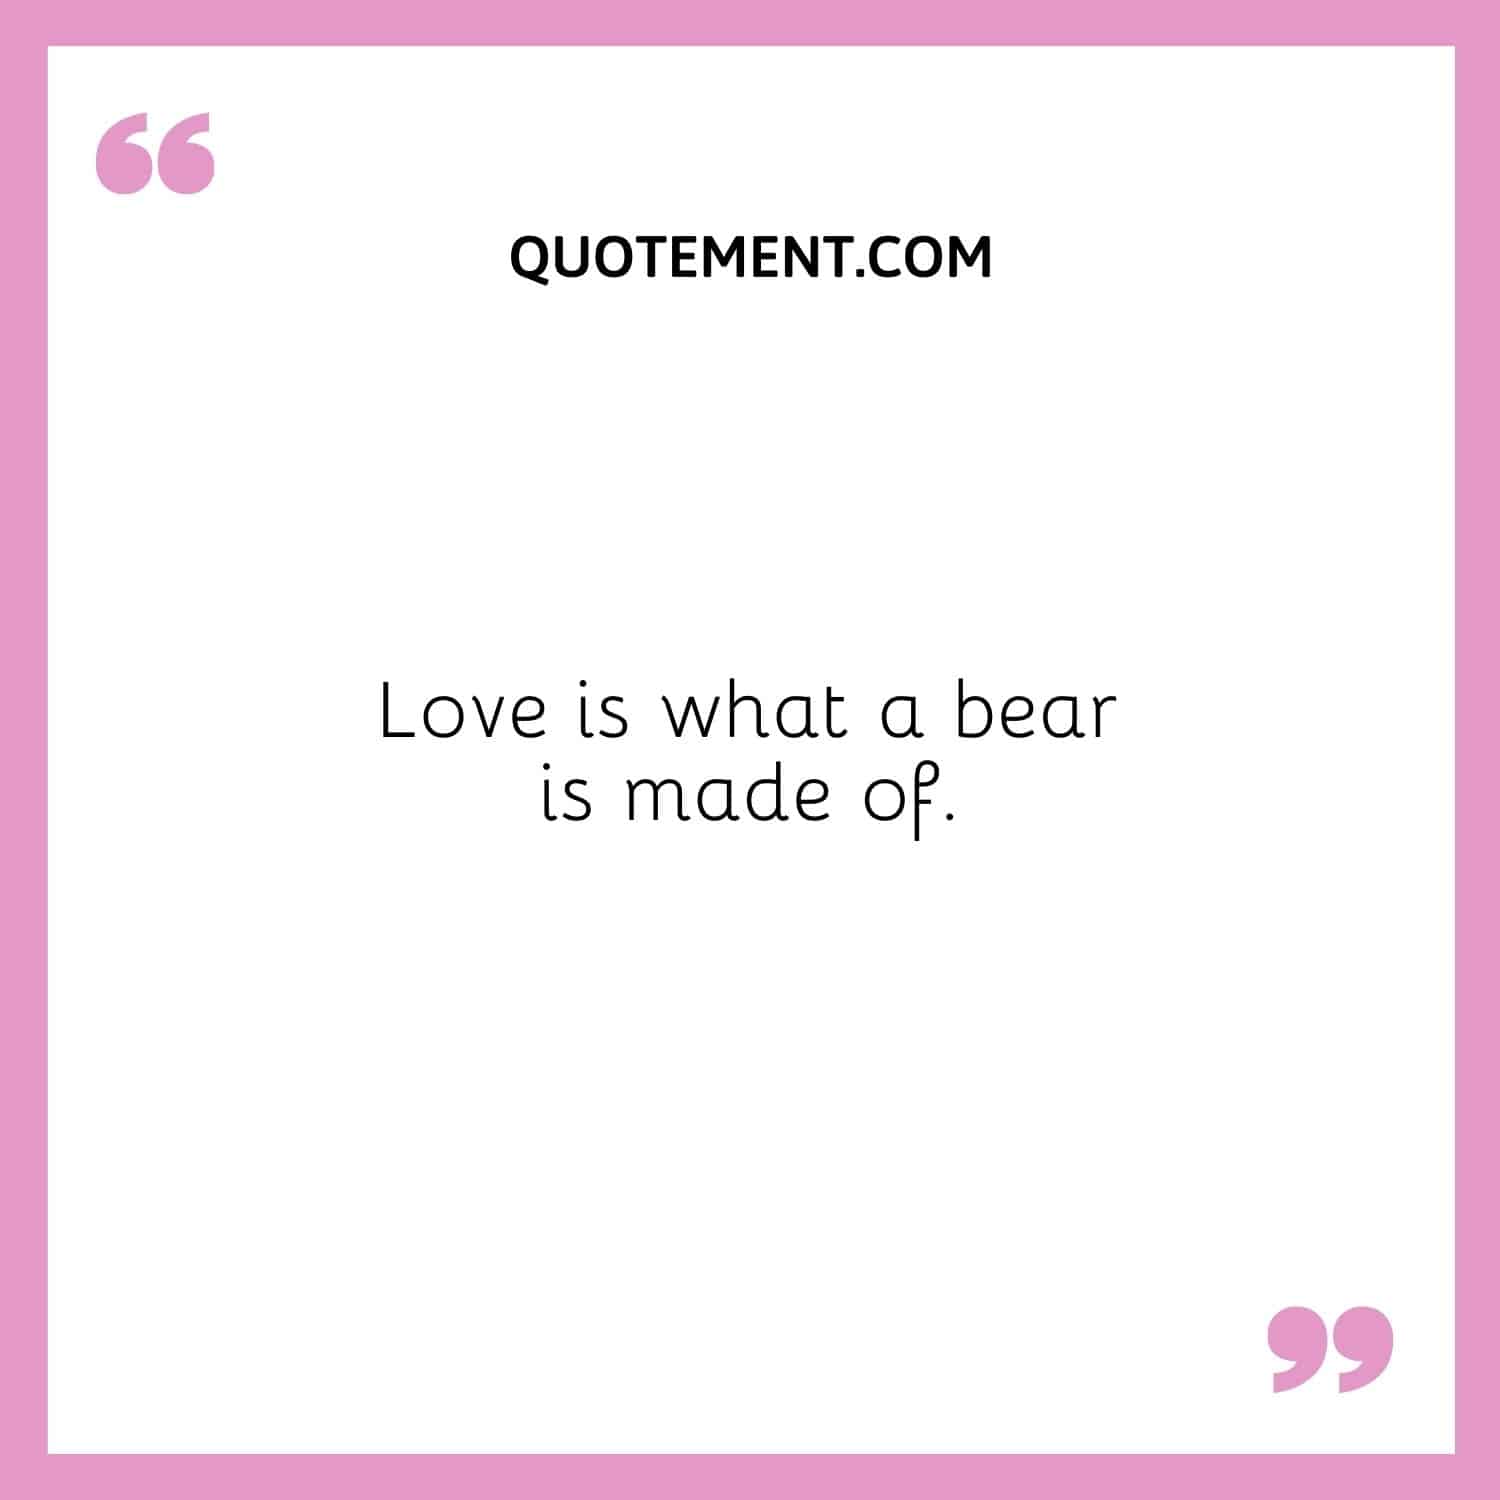 Love is what a bear is made of